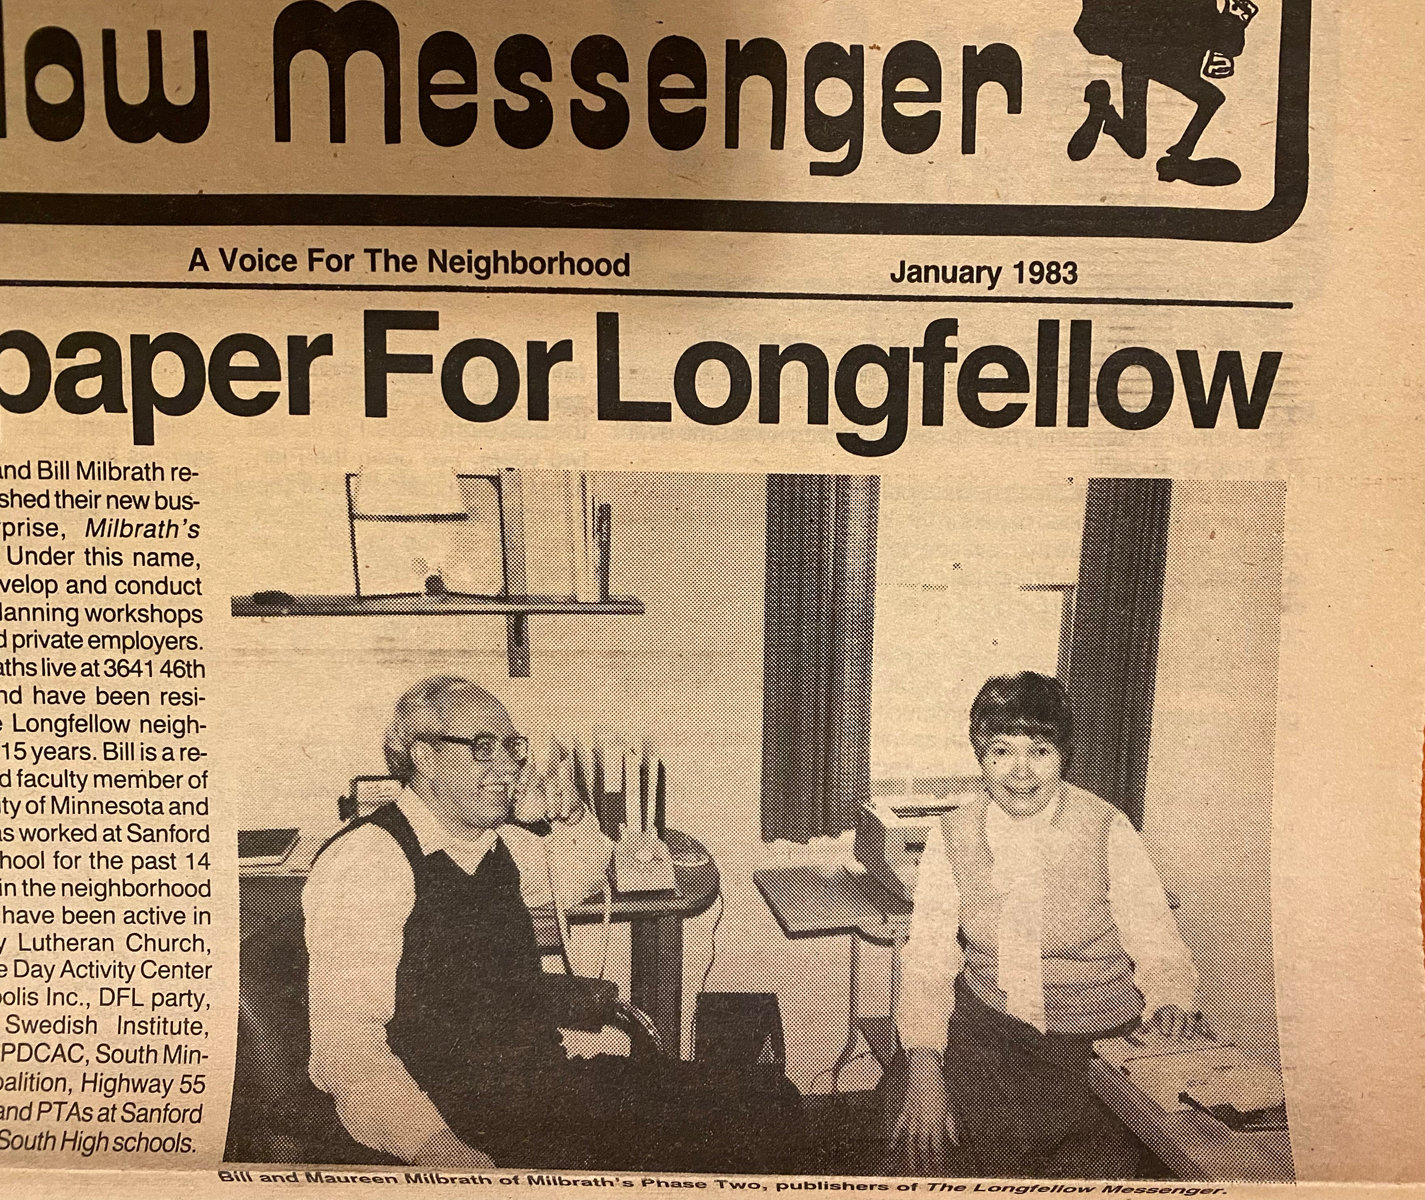 Bill and Maureen Milbrath of Milbrath's Phase Two, publishers of The Longfellow Messenger on page 1 of the preview edition in January 1983.